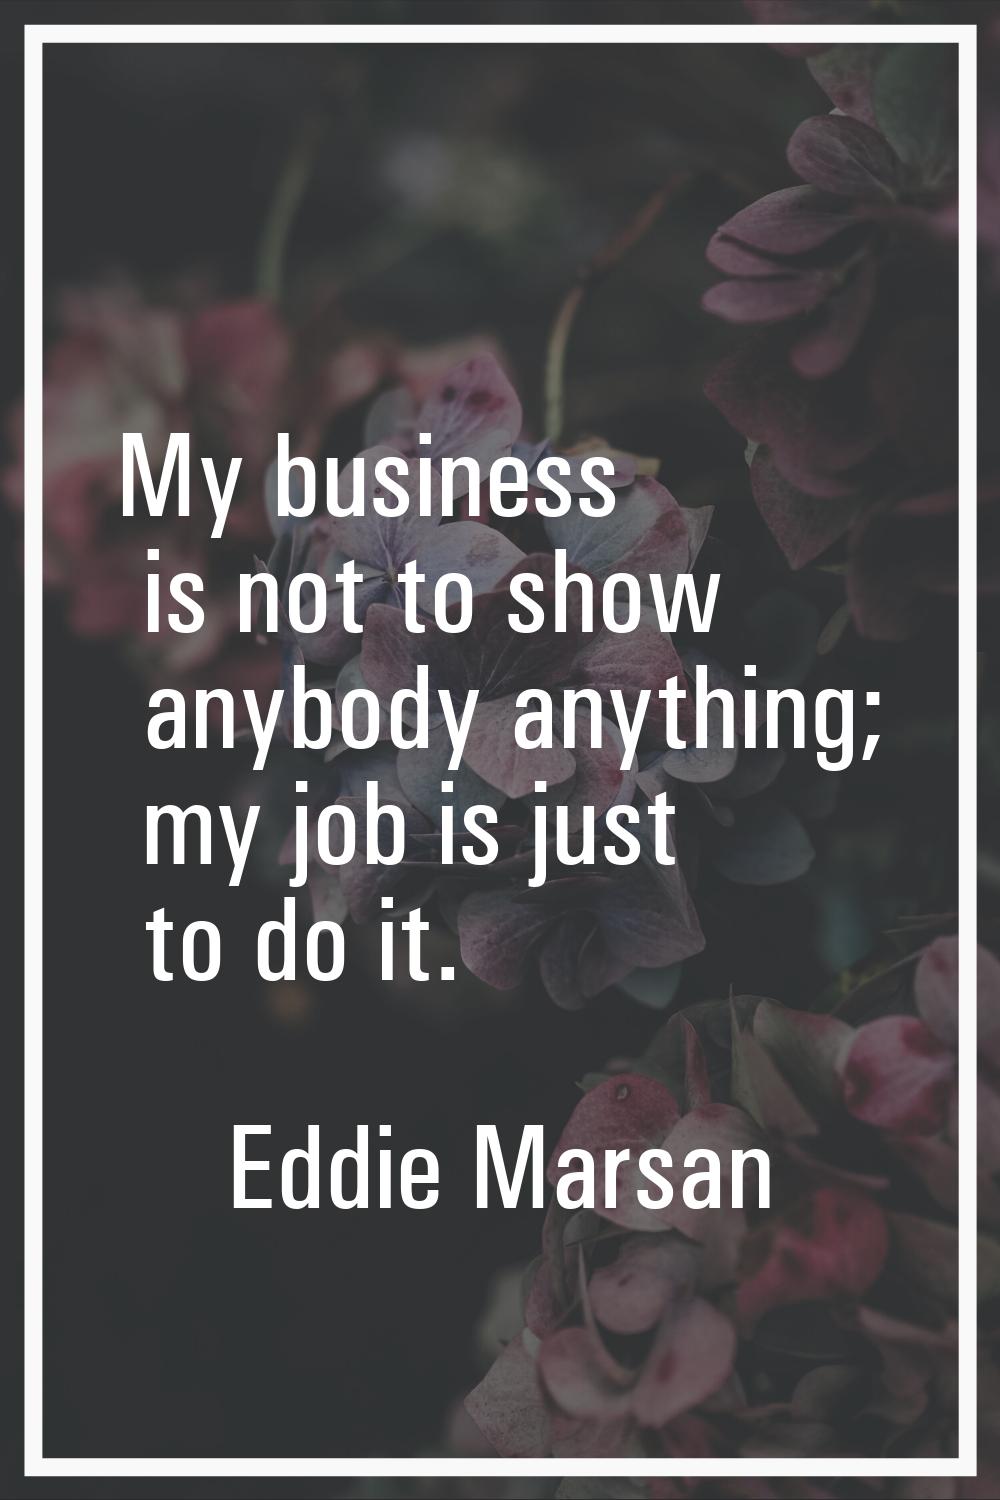 My business is not to show anybody anything; my job is just to do it.